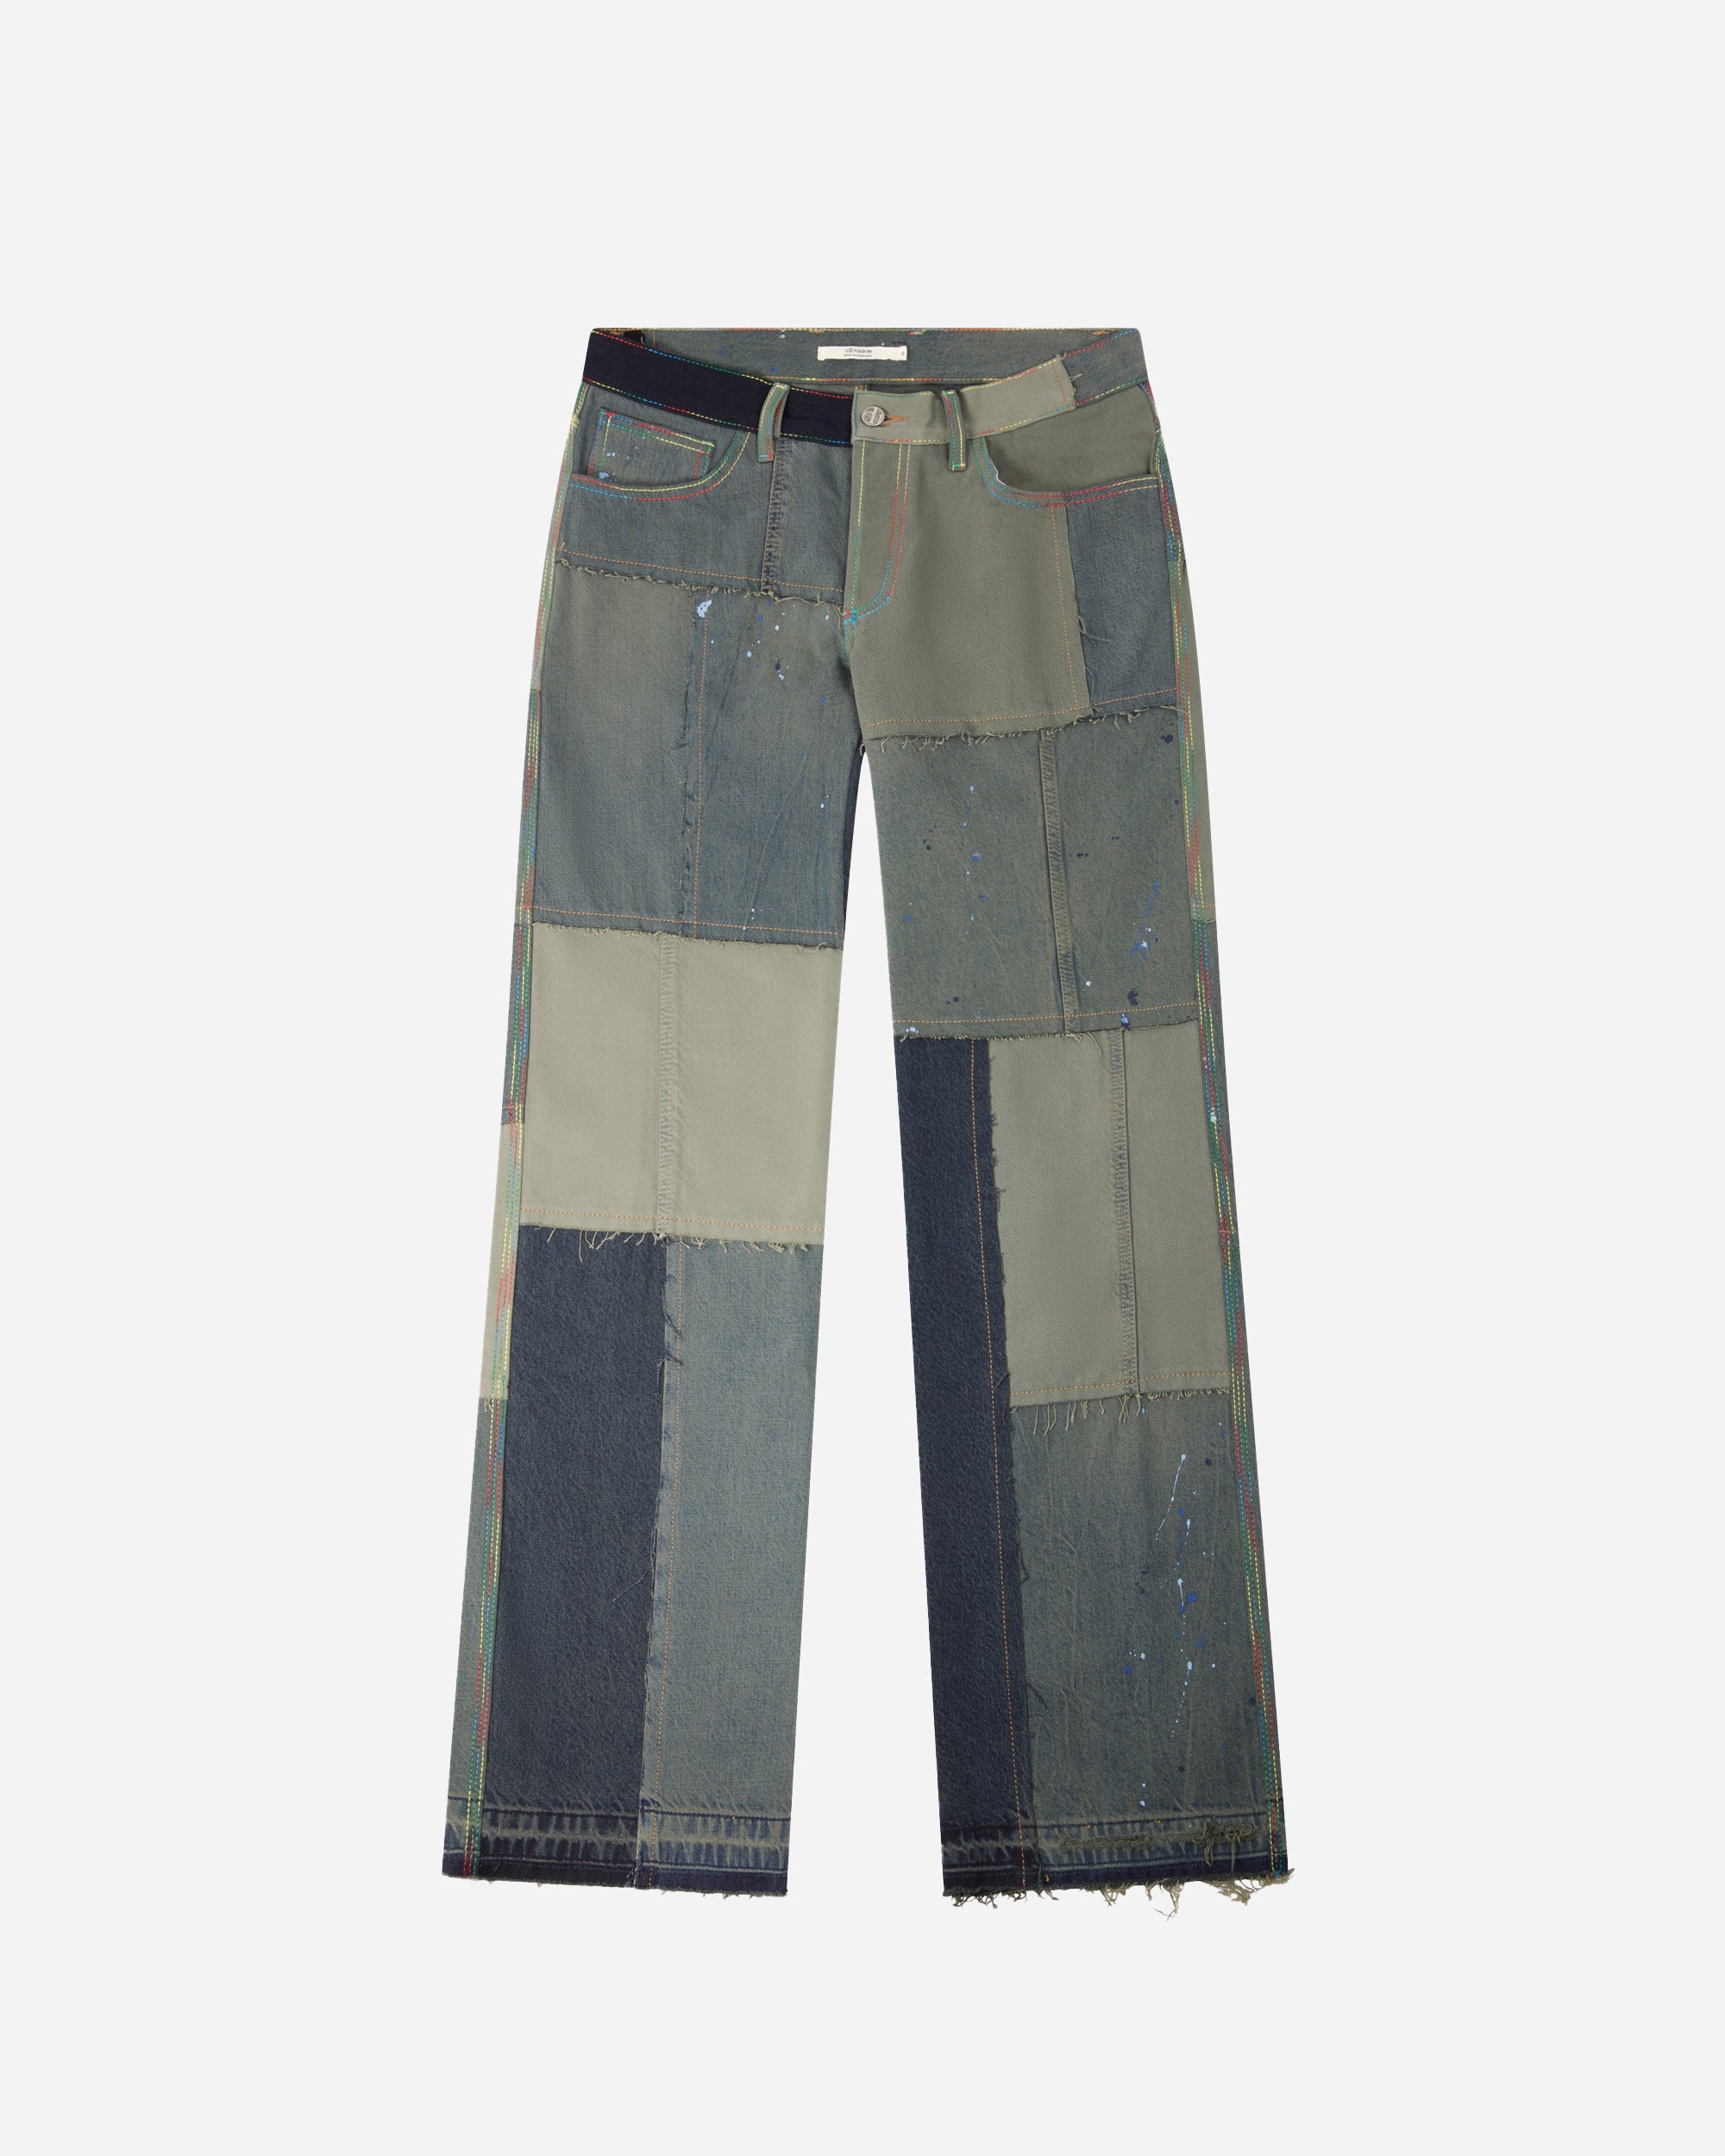 (di)vision Upcycled Low Waist Jeans BURNT OLIVE 60SS23